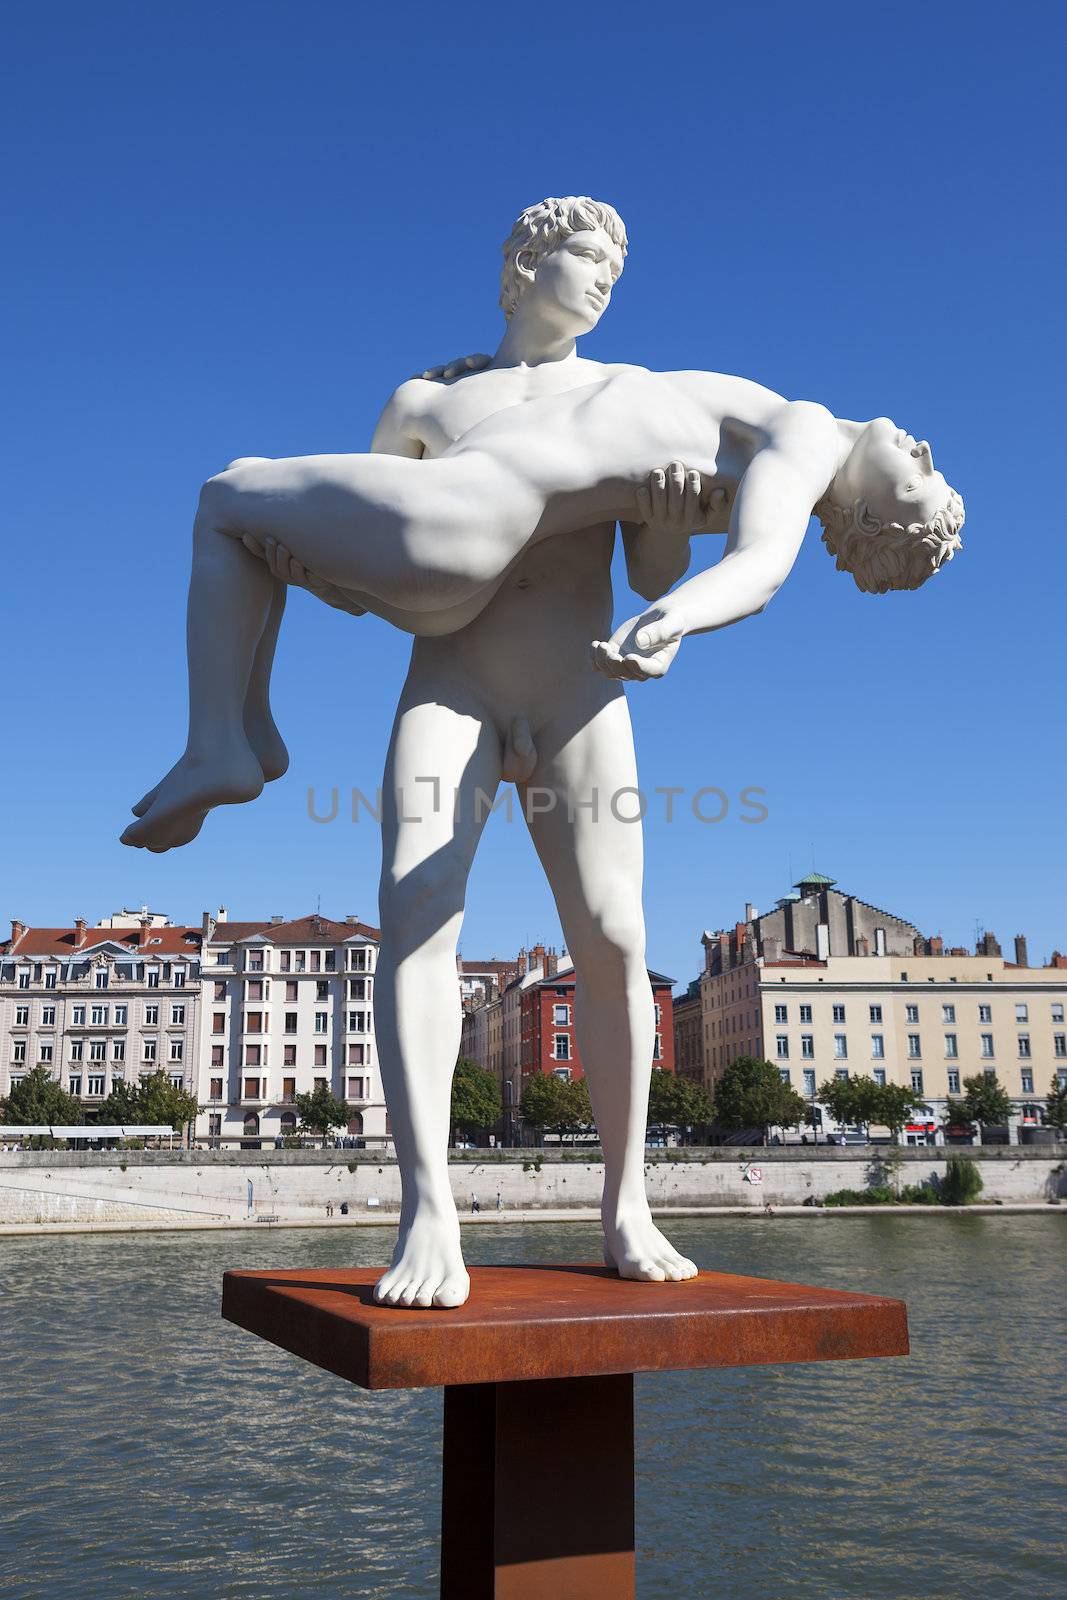 Famous sculpture in Lyon by vwalakte